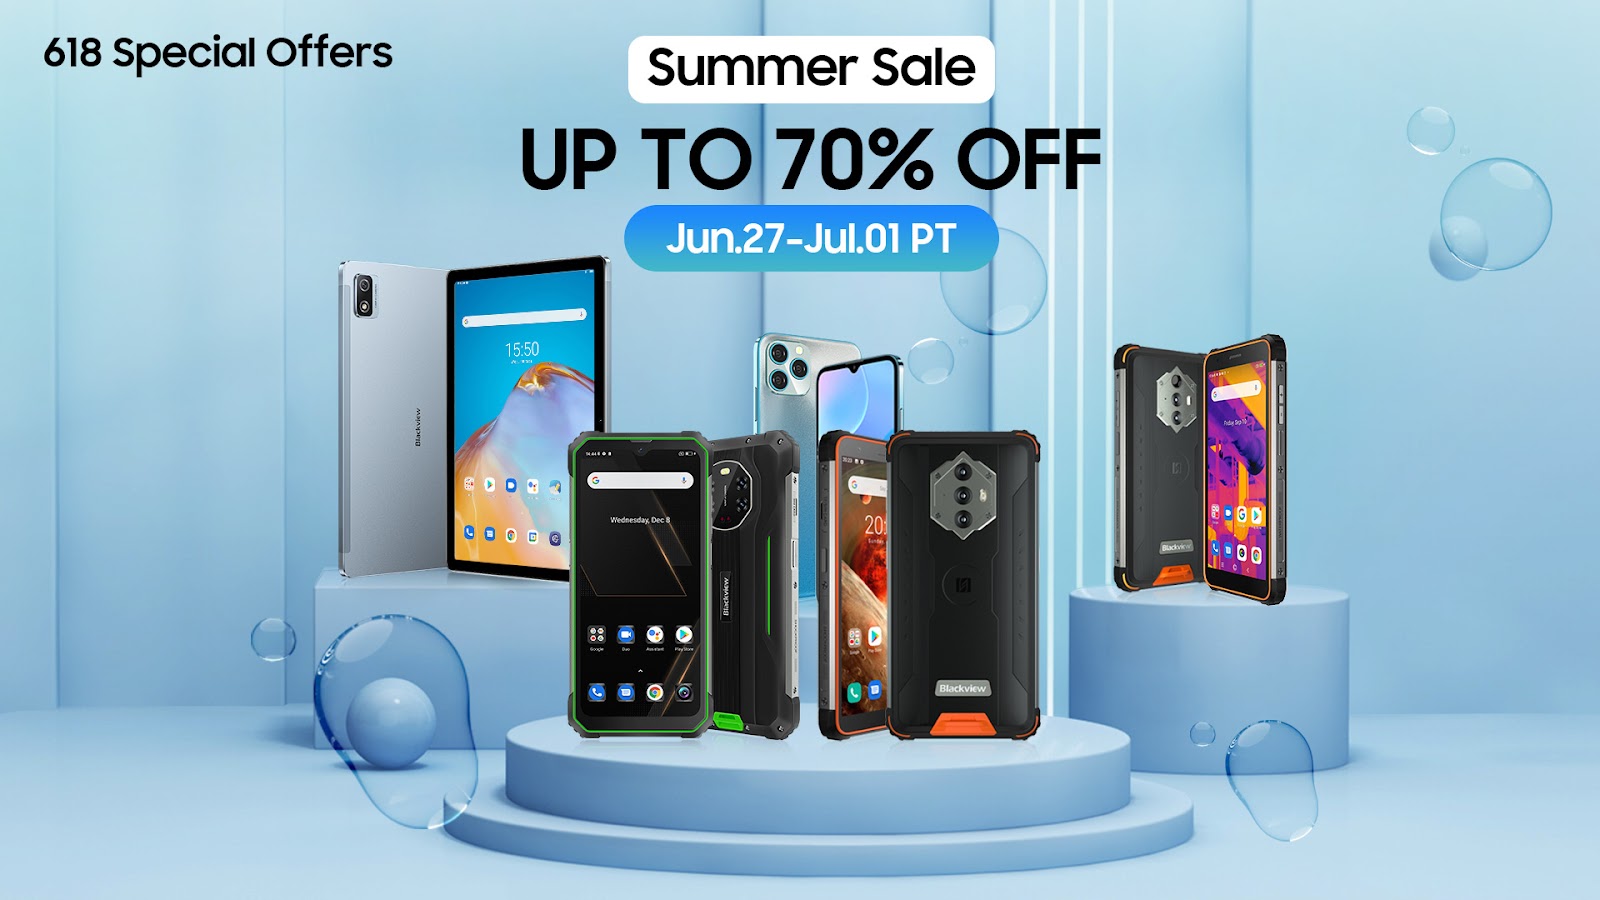 Blackview 618 summer sale 2022 goes live; massive discounts up to $264 off img 62b57ccd0c461